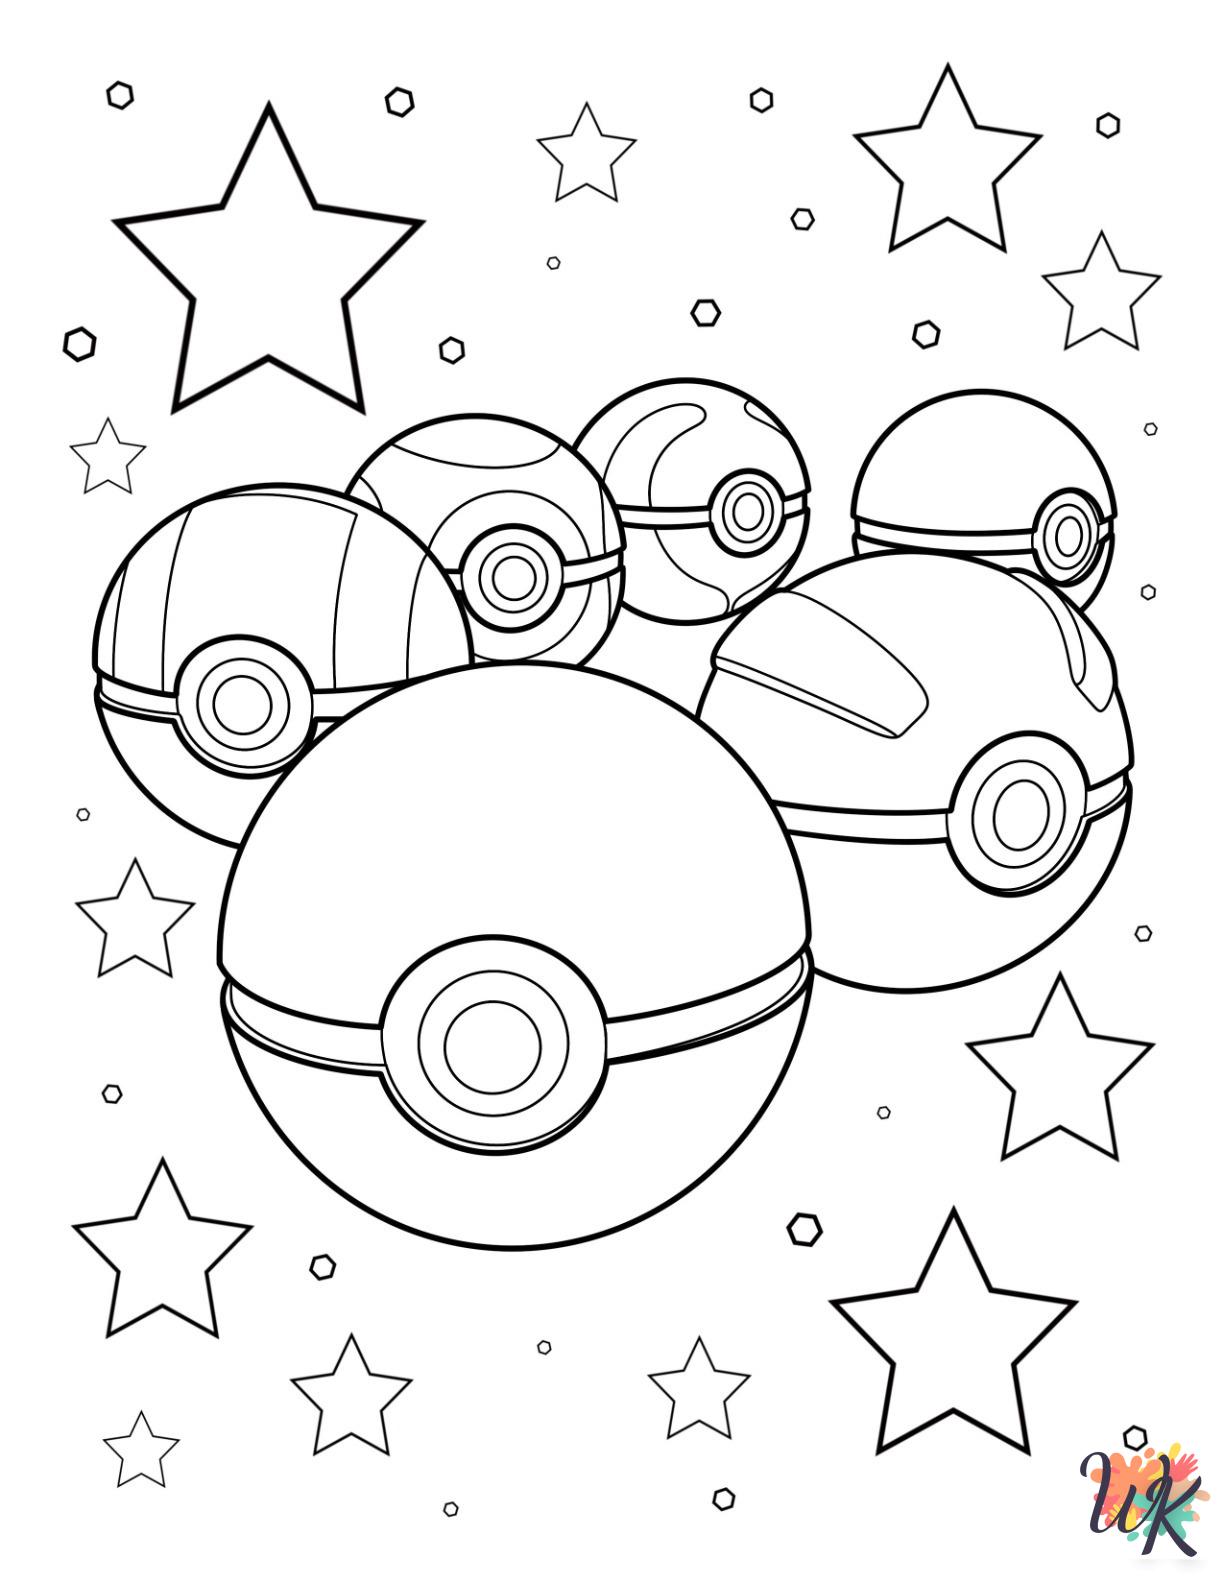 detailed Pokeball coloring pages for adults